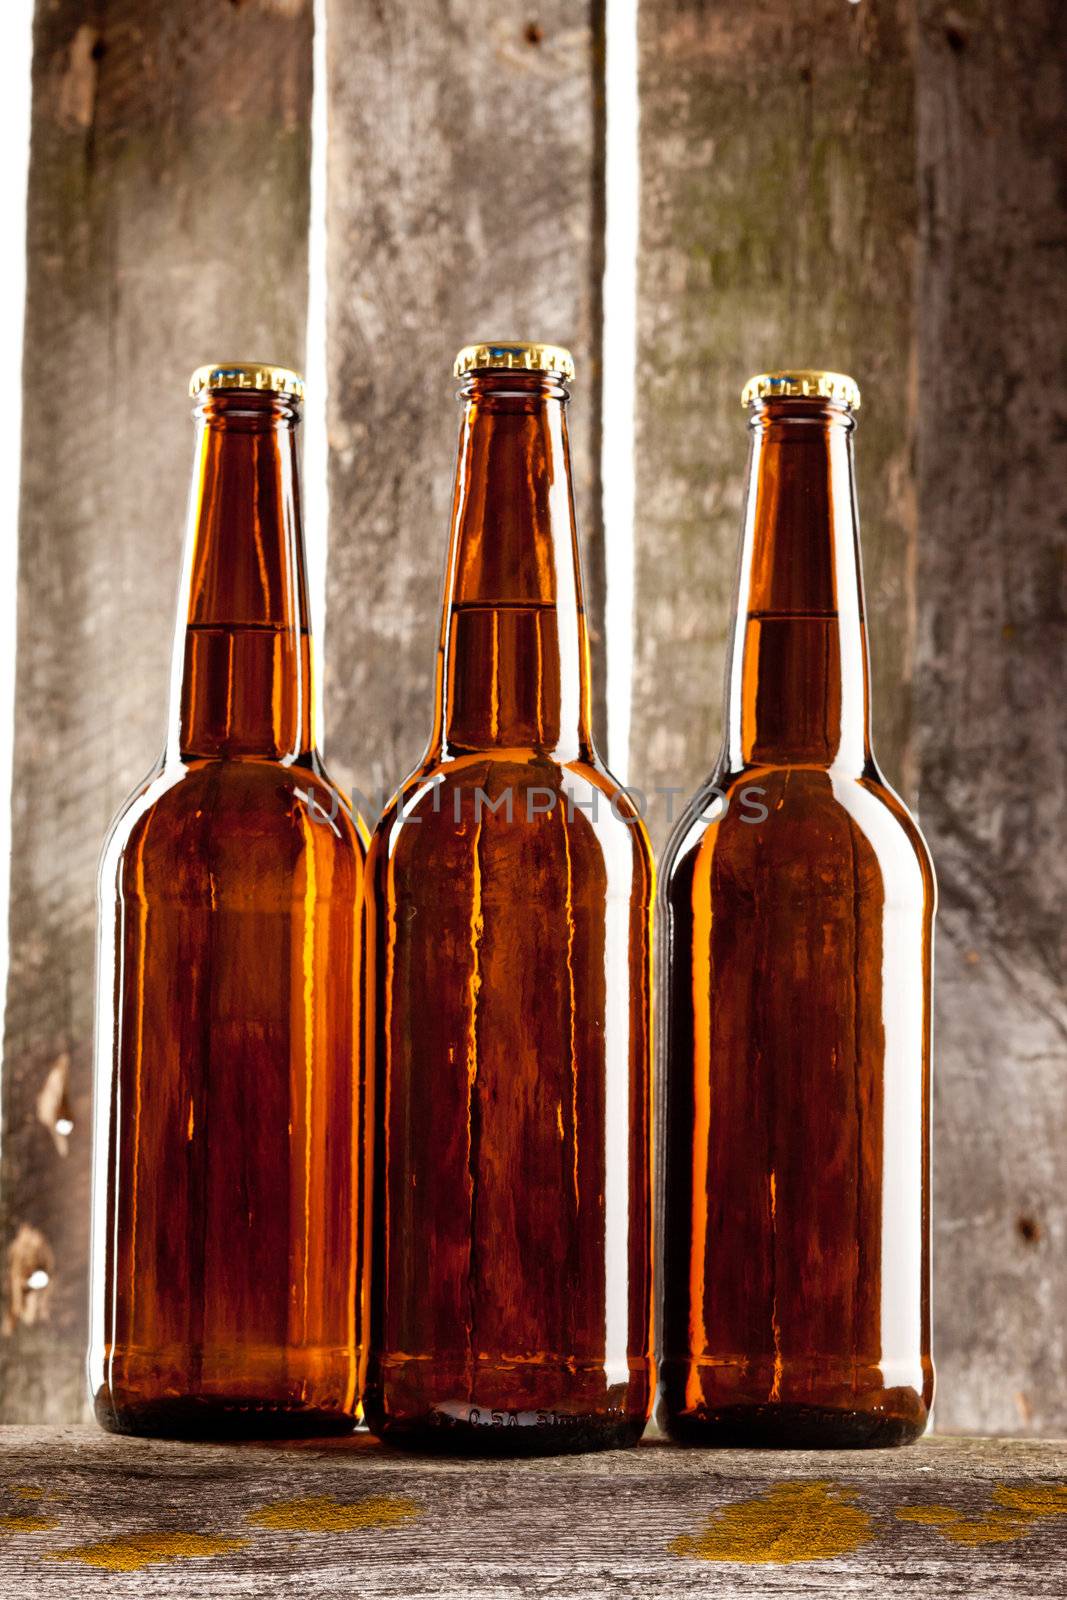 three beer bottle on old wooden plank backbround